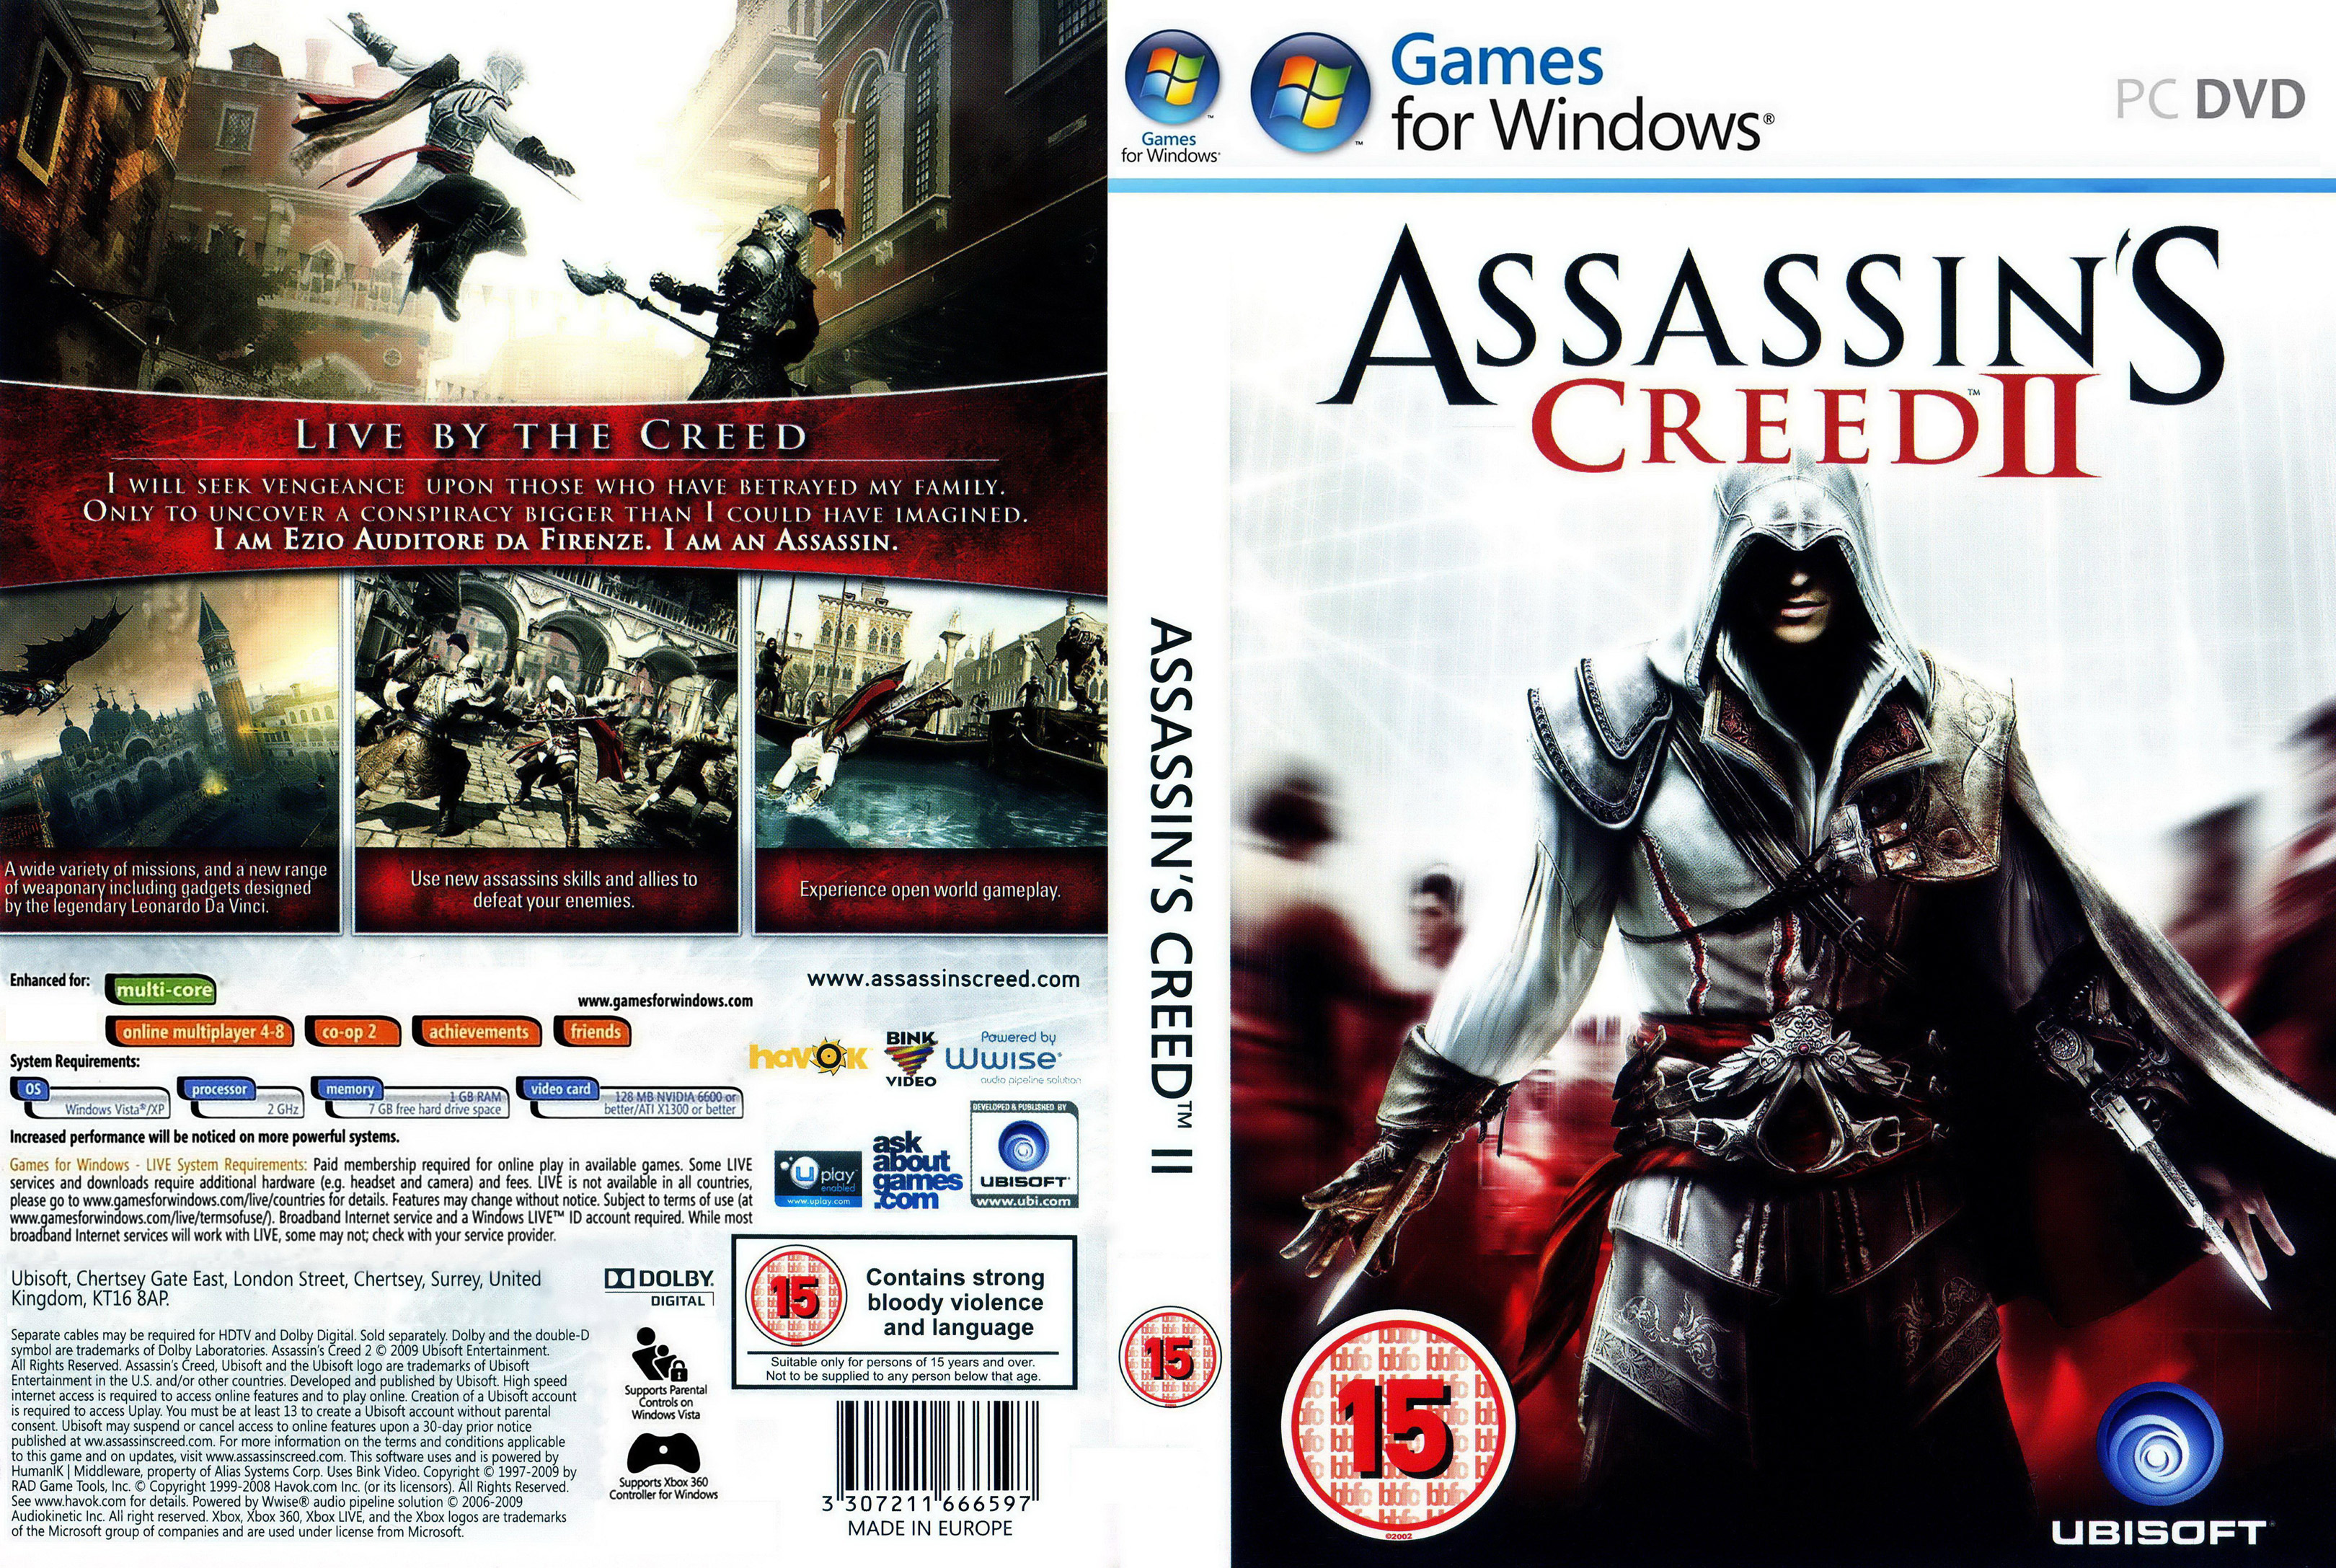 Assassin's Creed brother PC DVD. Чит коды для Assassins Creed 2 на Xbox. Русификатор ассасин крид 2